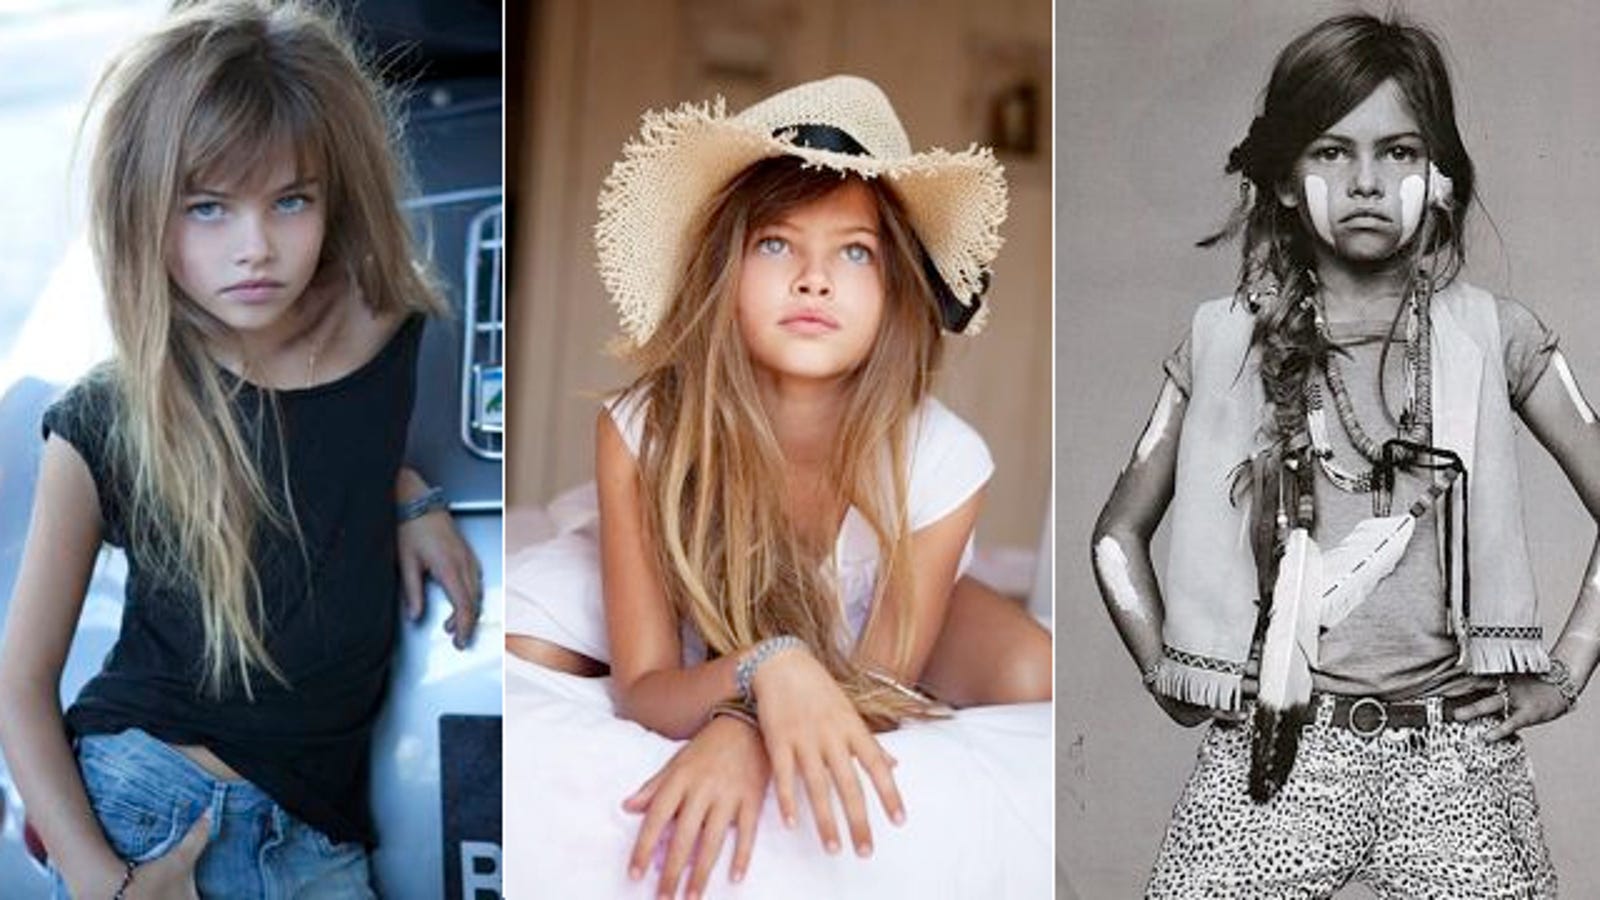 Fashion Industry Salivates Over Creepy Photos Of 10-Year-Old French Girl